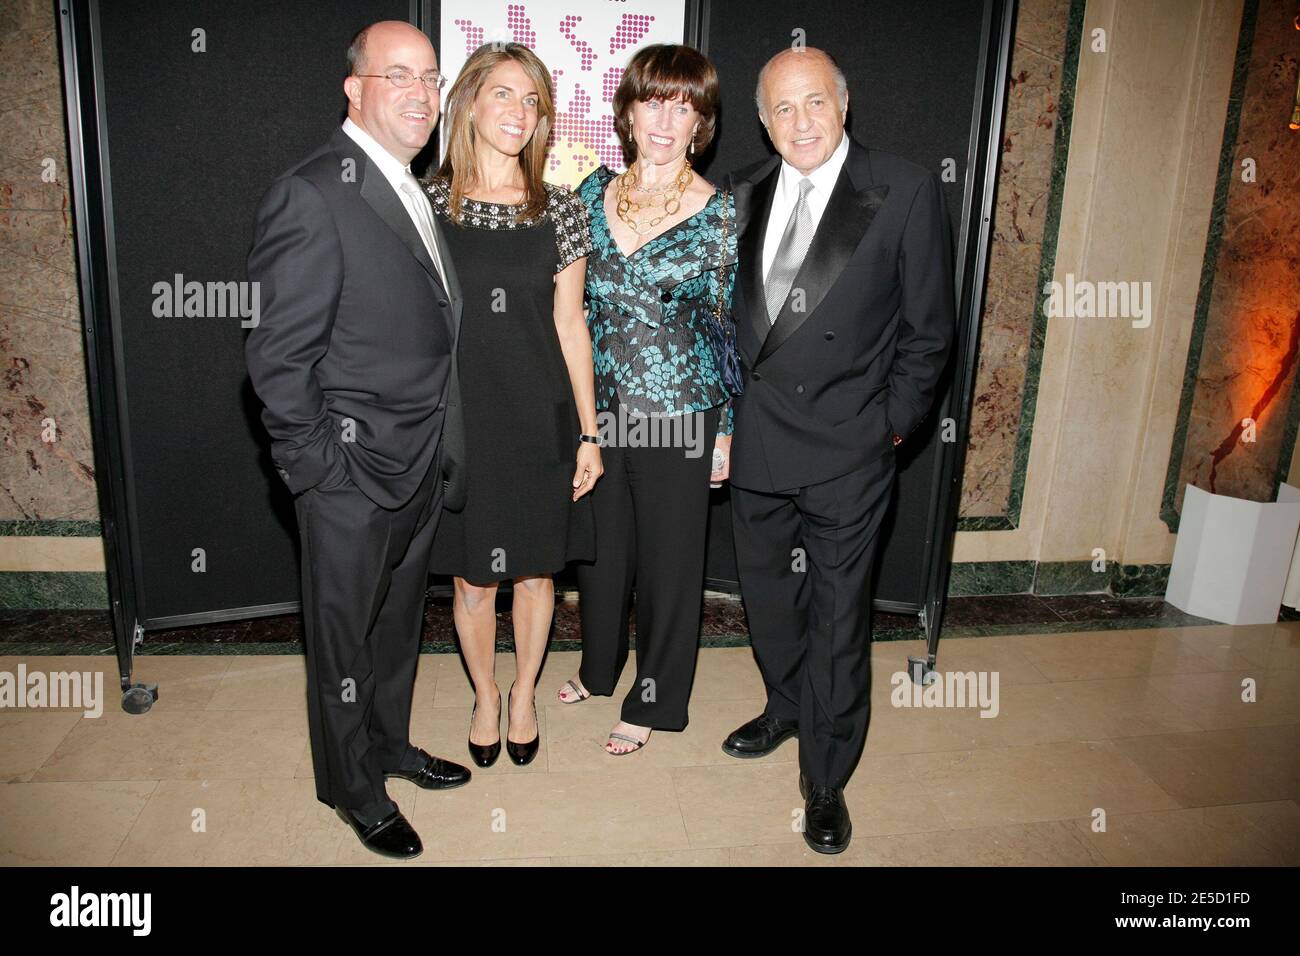 NBC Universal CEO Jeff Zucker (L) with his wife Caryn and Universal Music Group CEO Doug Morris and his wife Monique attend the FIAF 2008 Trophee des Arts Gala honoring Philippe de Montebello and Jean-Bernard Levy, at the Plaza Hotel in New York City, NY, USA on October 29, 2008. Photo by Aton Pak/ABACAPRESS.COM Stock Photo